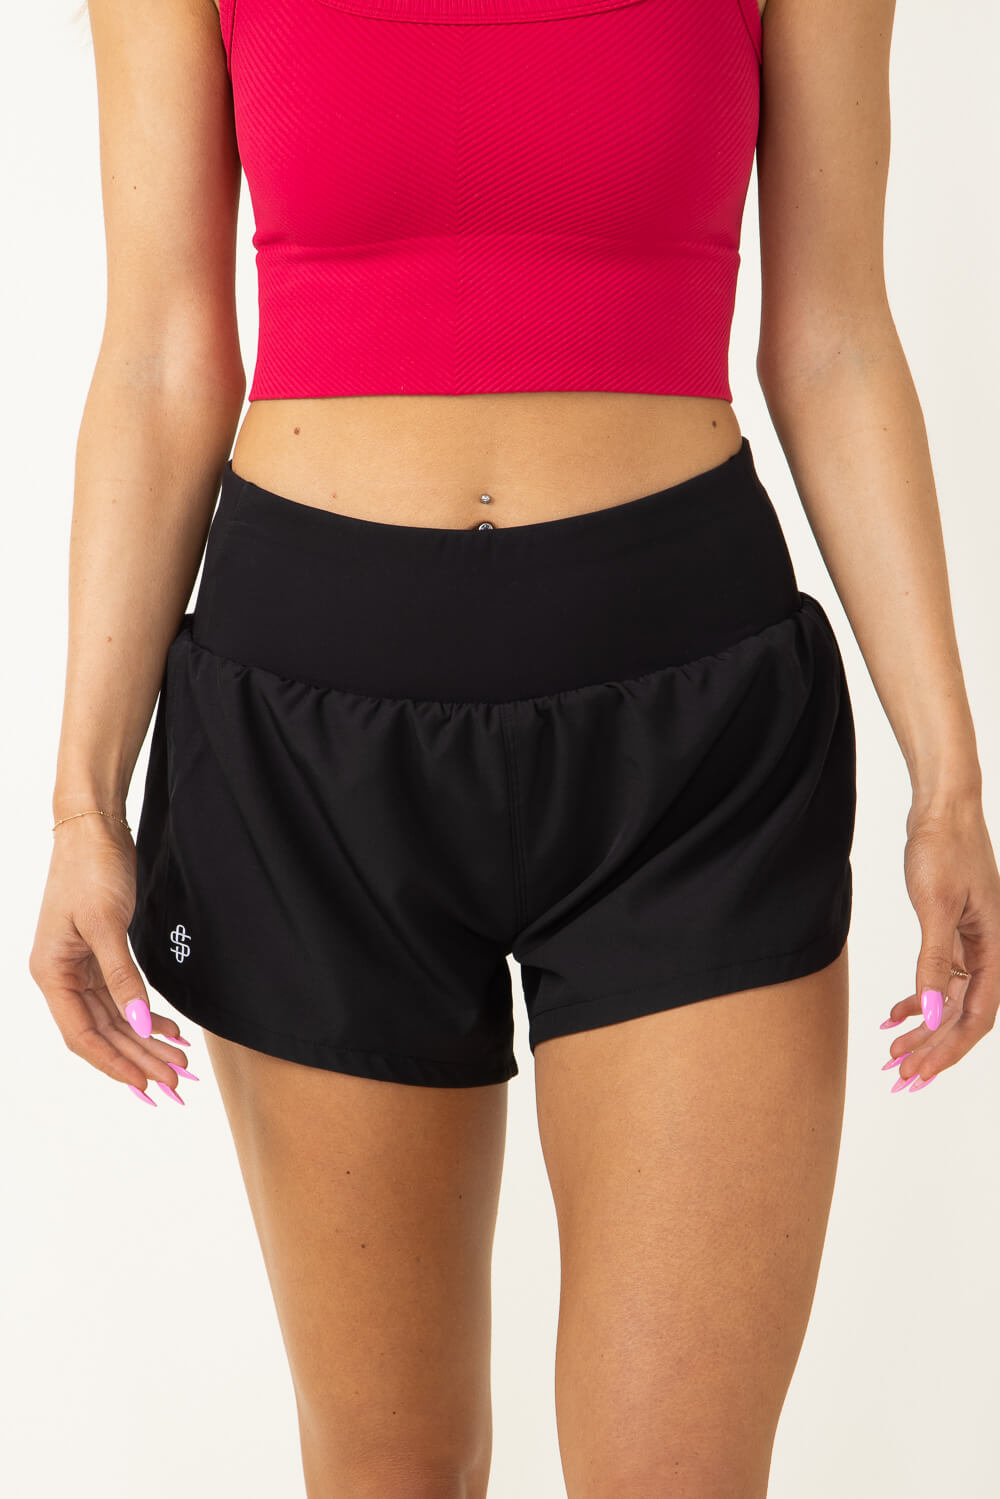 Simply Southern Tech Shorts for Women in Black